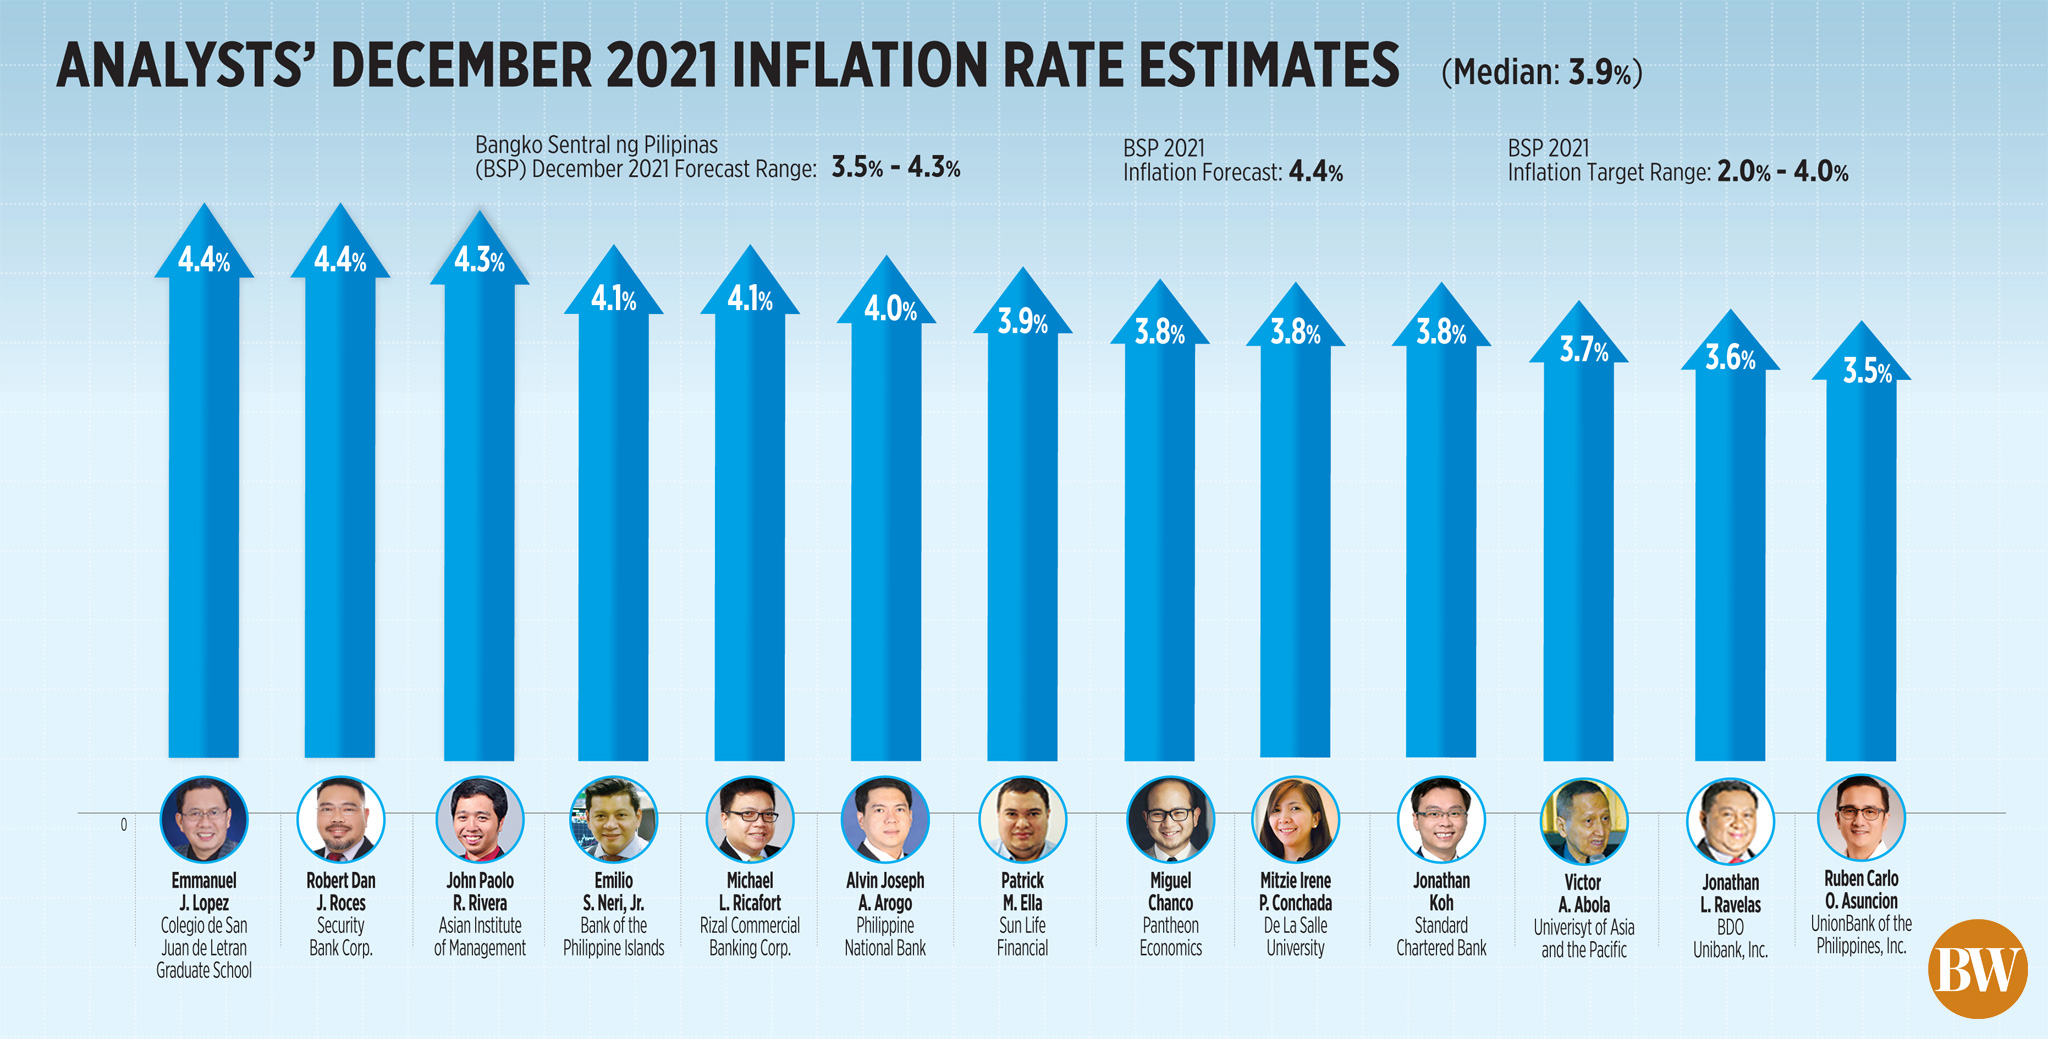 Analysts’ December 2021 inflation rate estimates